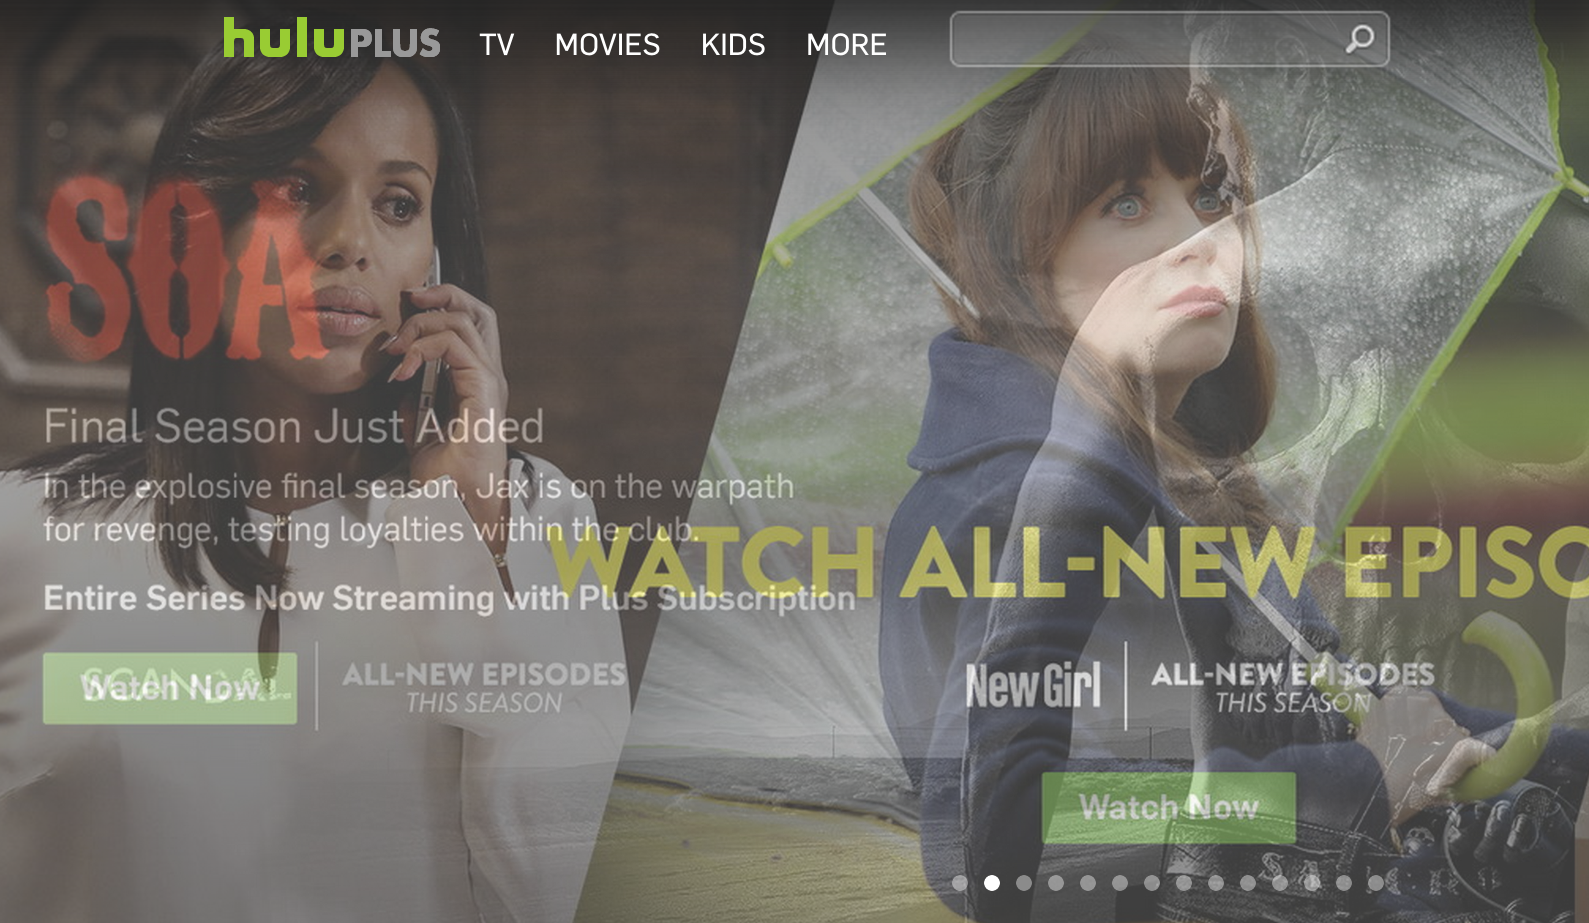 Cablevision Will Sell Hulu Plus Subscriptions Directly To Broadband Customers